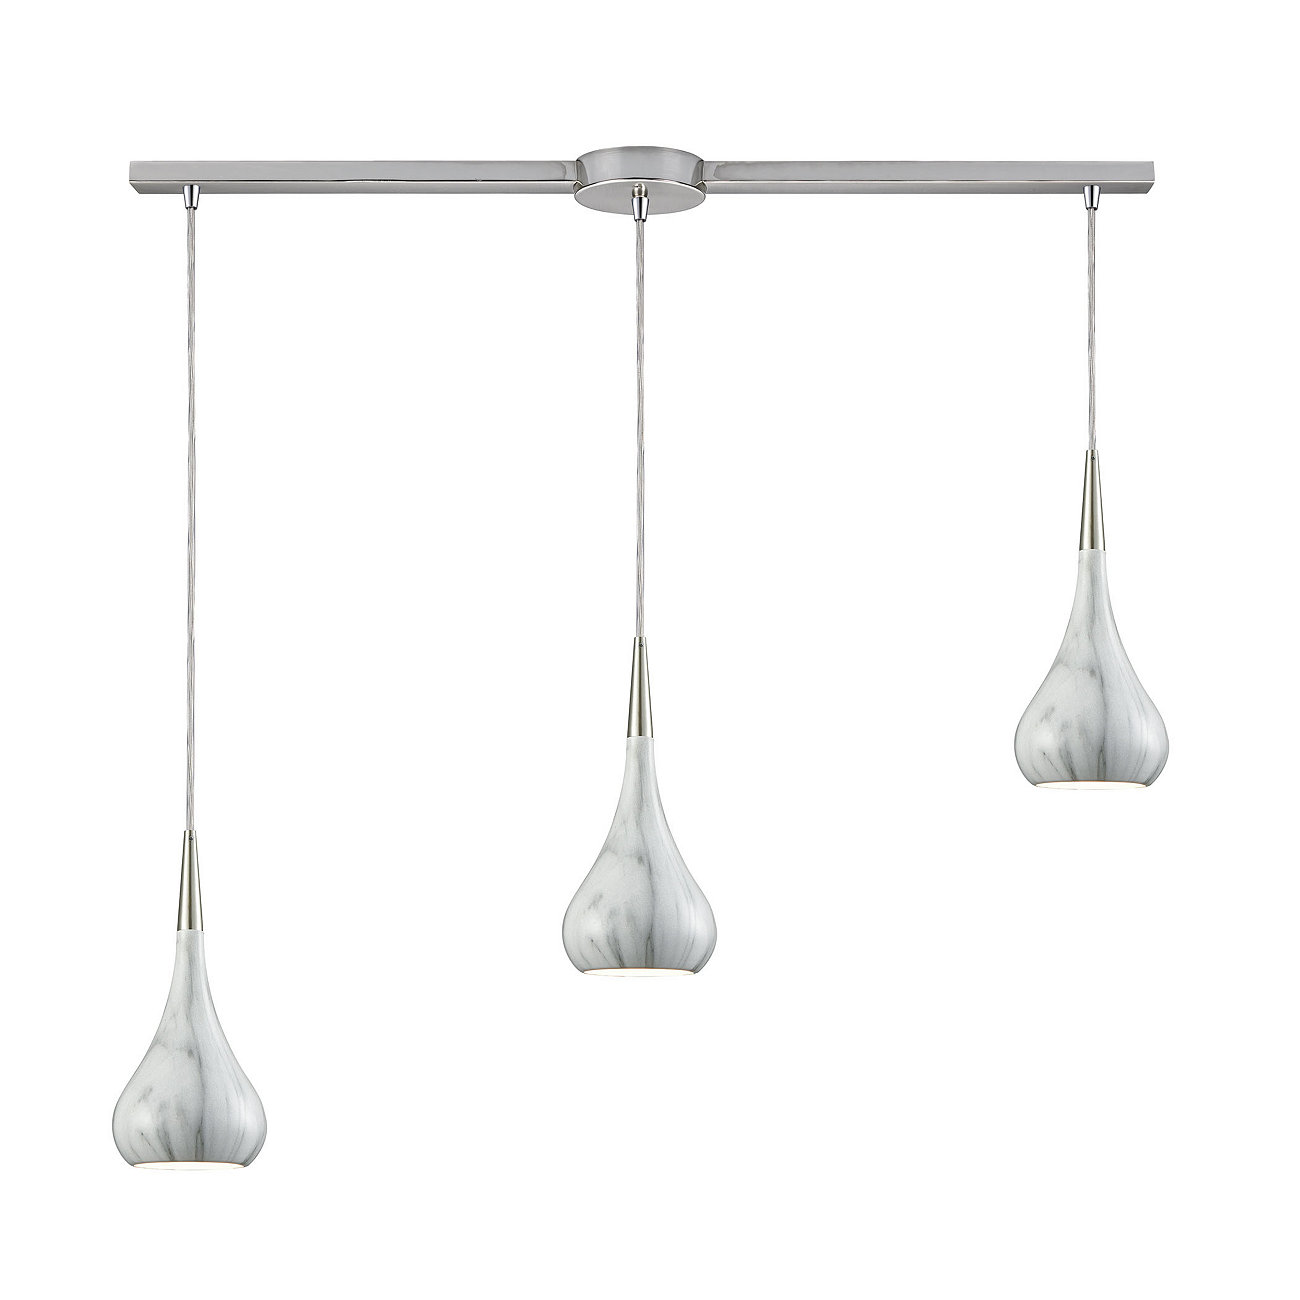 Lindsey 3 Light Linear Bar Fixture in Satin Nickel with Marble Print Shade ELK Lighting